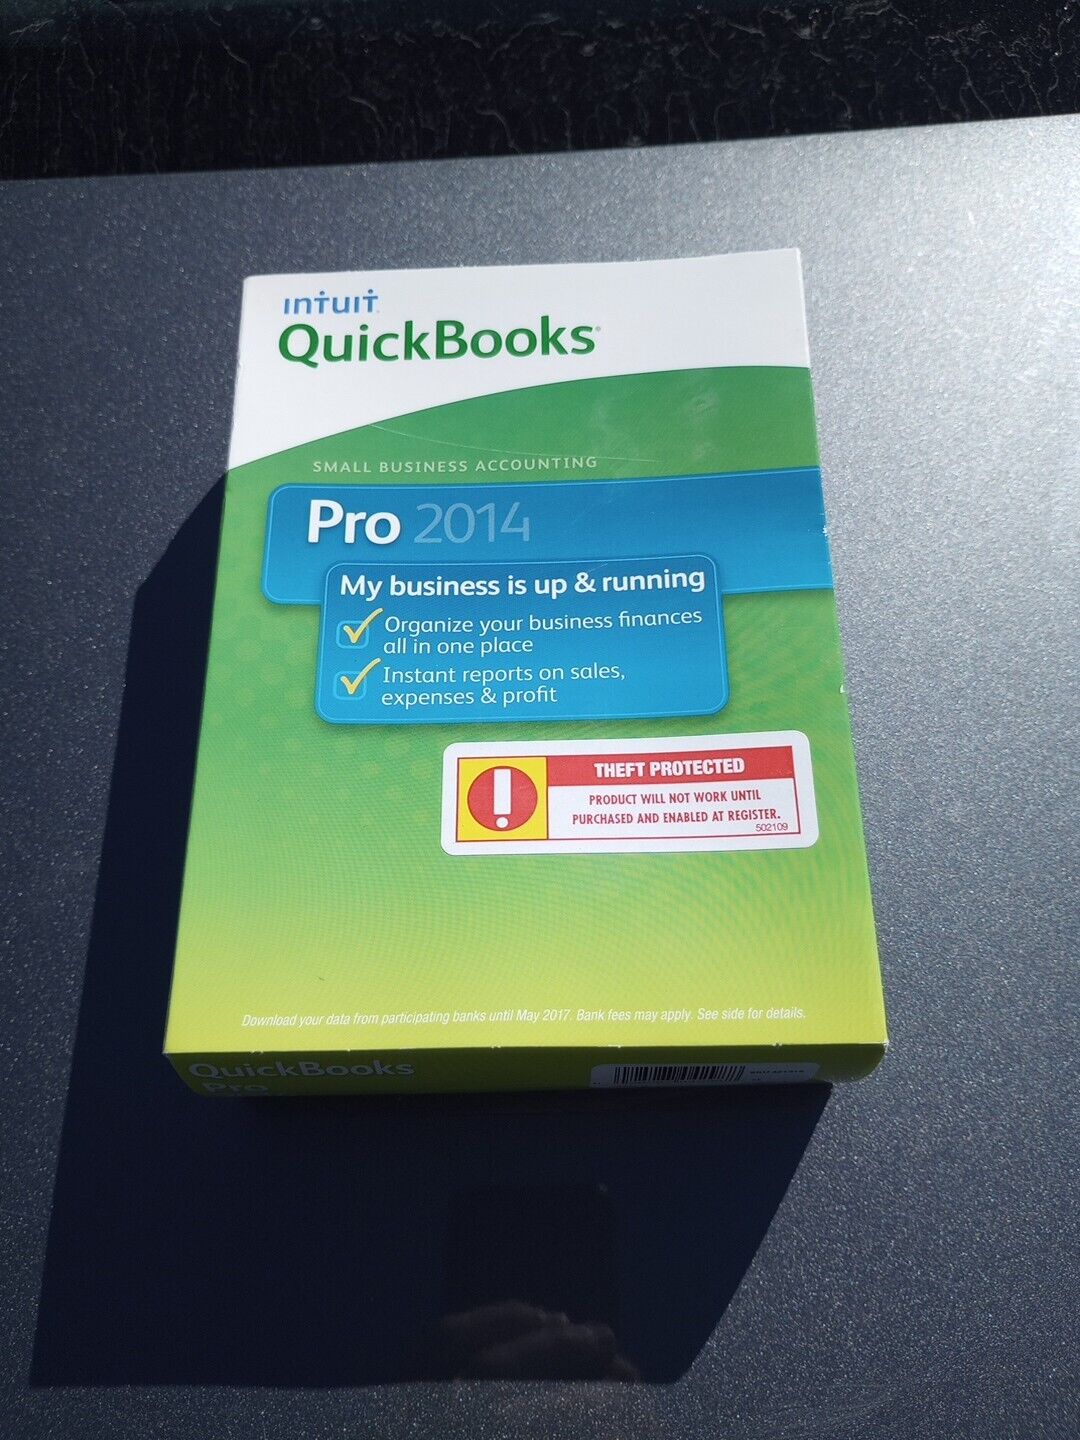 Intuit QuickBooks Pro 2014 for Windows Small Business